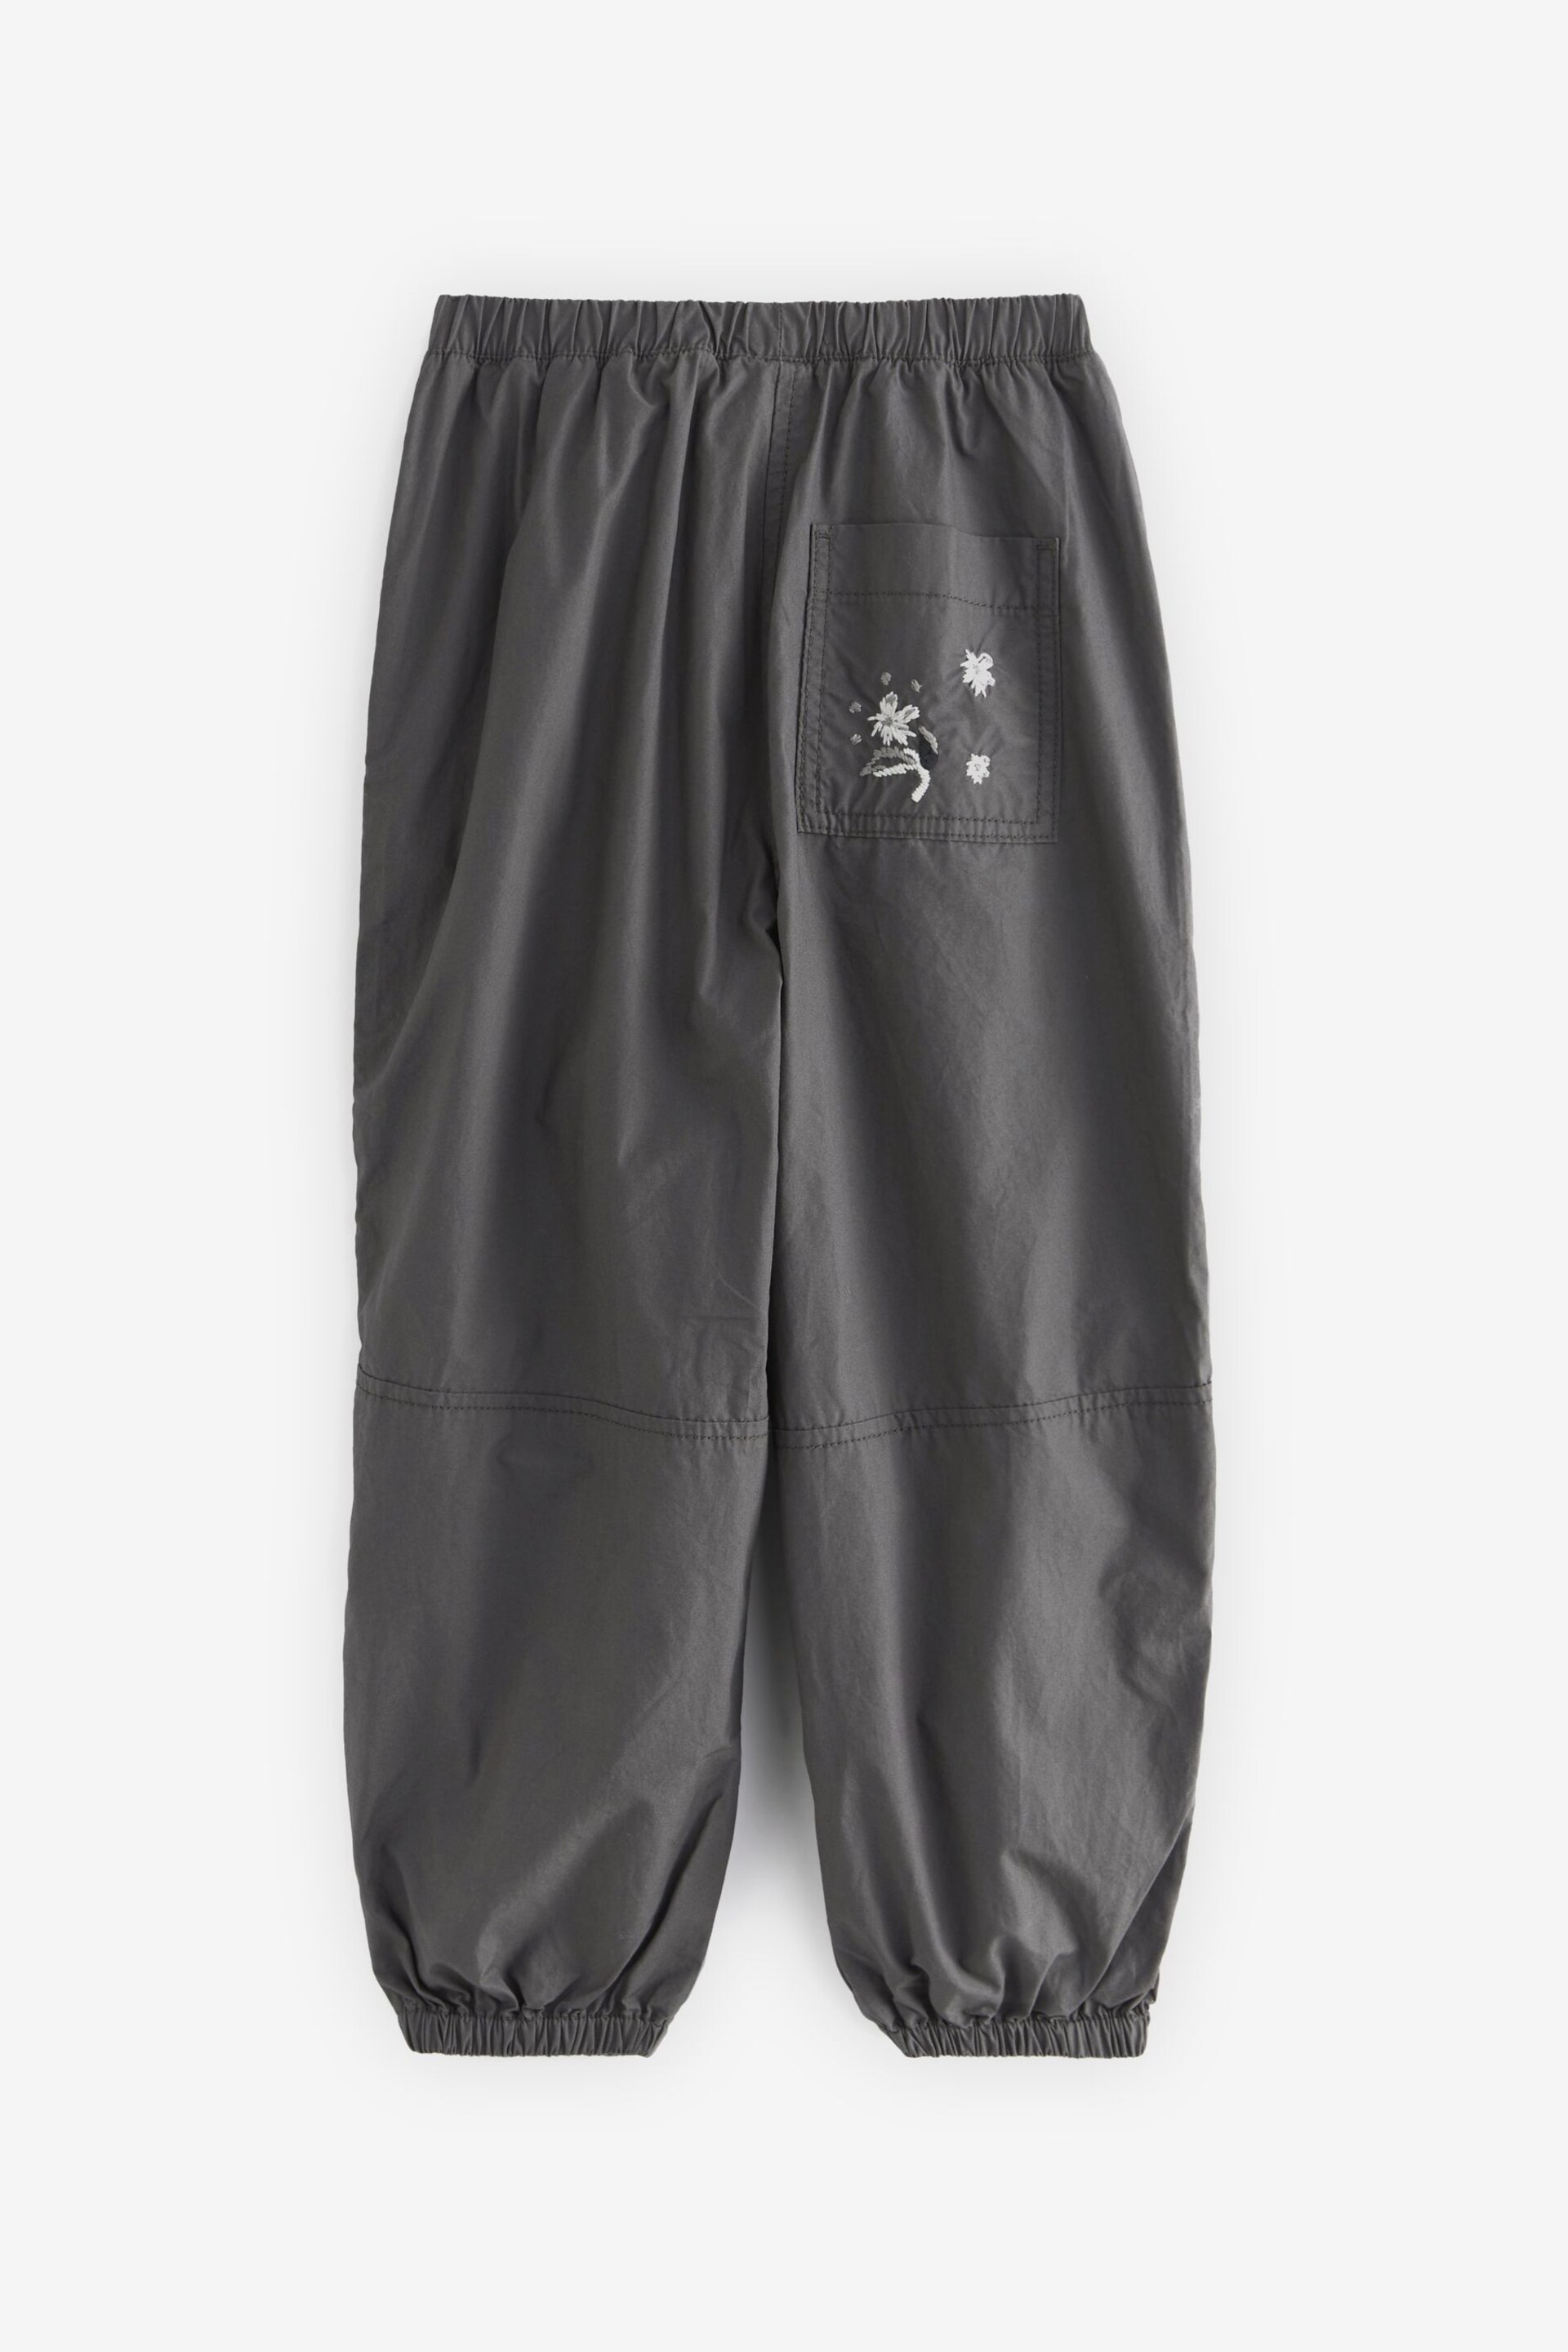 Charcoal Grey Embellished Parachute Cargo Cuffed Trousers (3-16yrs) - Image 2 of 3